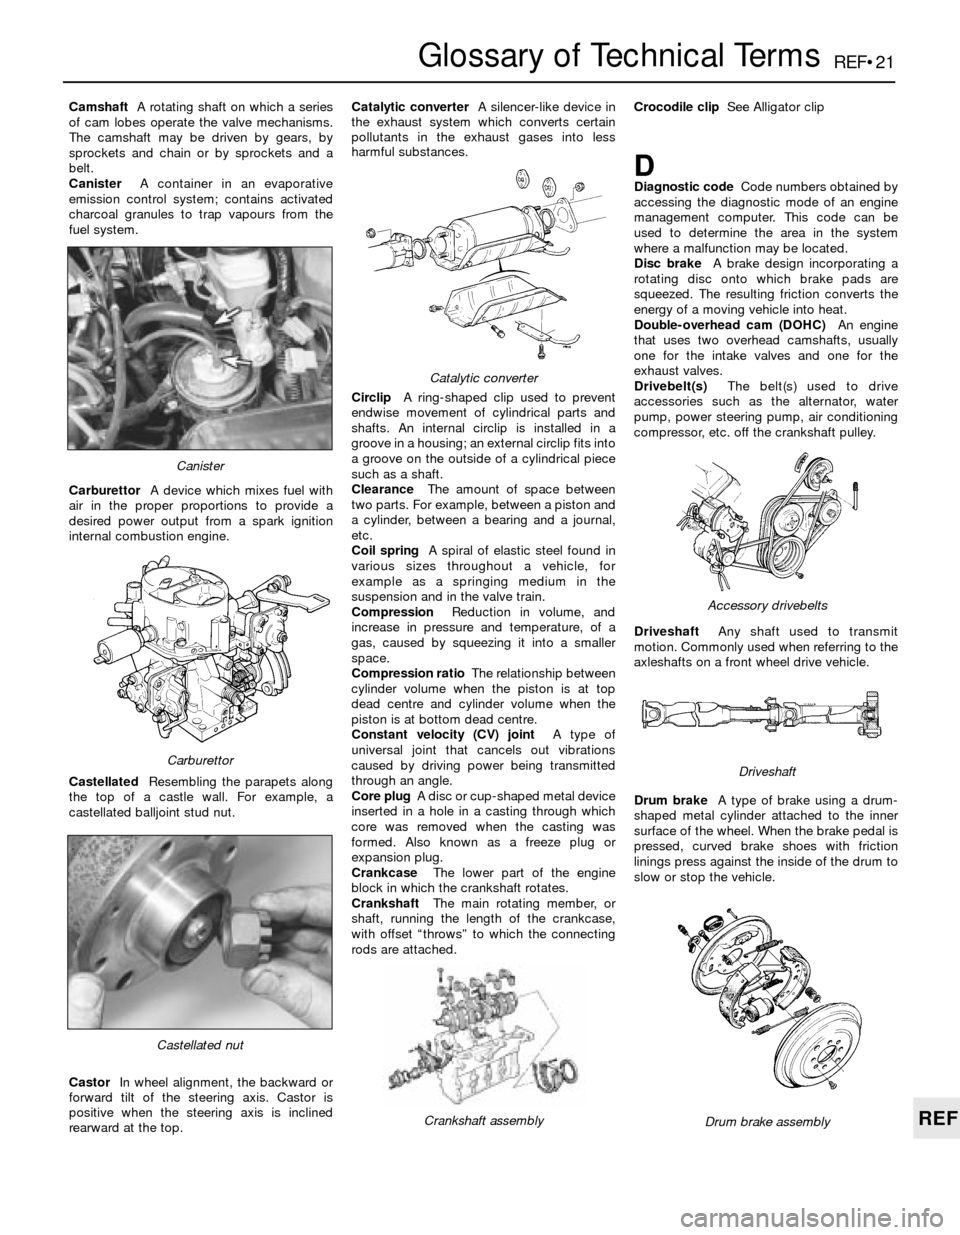 BMW 3 SERIES 1983 E30 Workshop Manual REF•21
REF
Glossary of Technical Terms
CamshaftA rotating shaft on which a series
of cam lobes operate the valve mechanisms.
The camshaft may be driven by gears, by
sprockets and chain or by sprocke